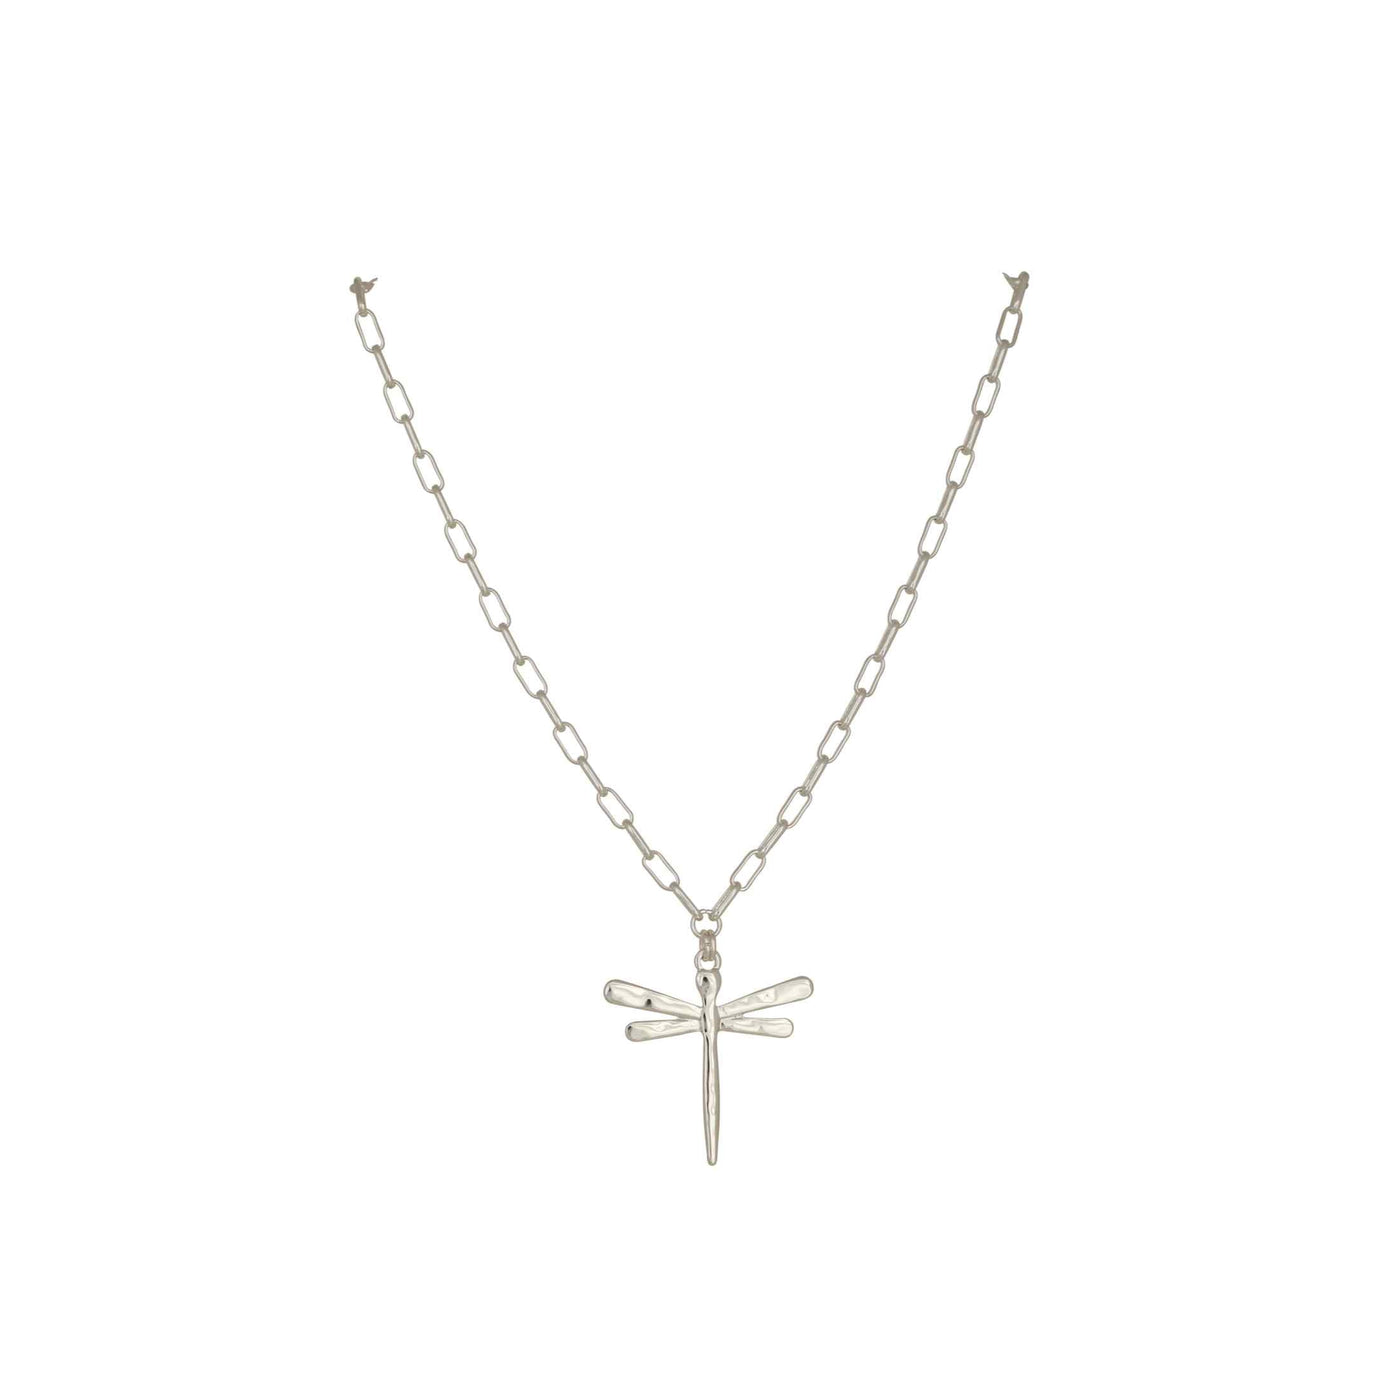 Merx - Fashion Chain Necklace with Dragonfly Pendant in Silver 